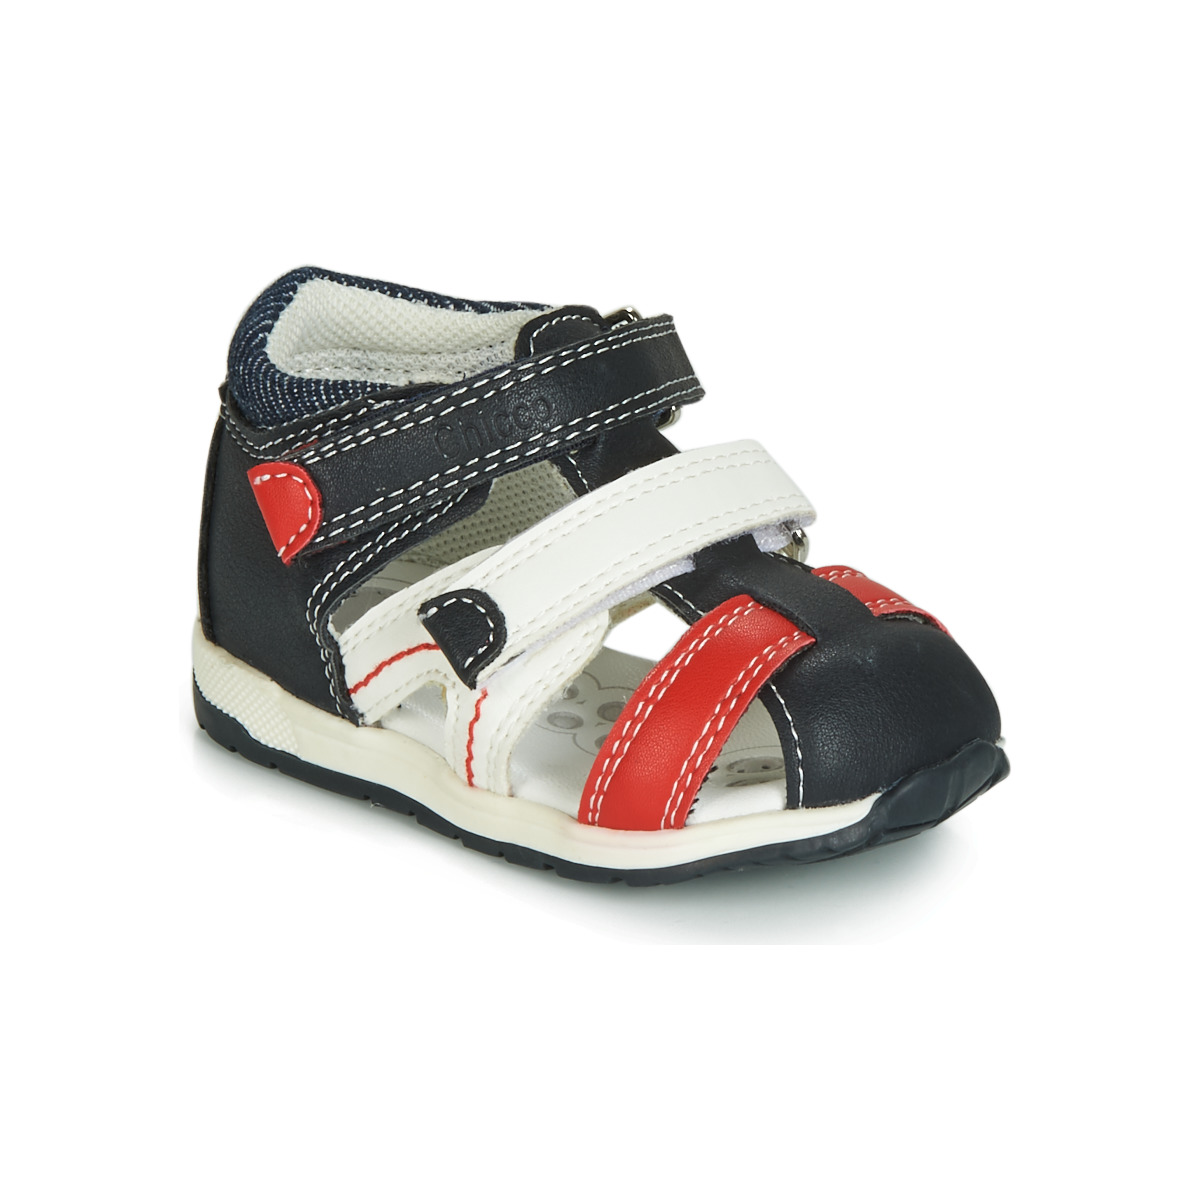 Shoes Boy Sandals Chicco GABRIEL Blue / White / Red